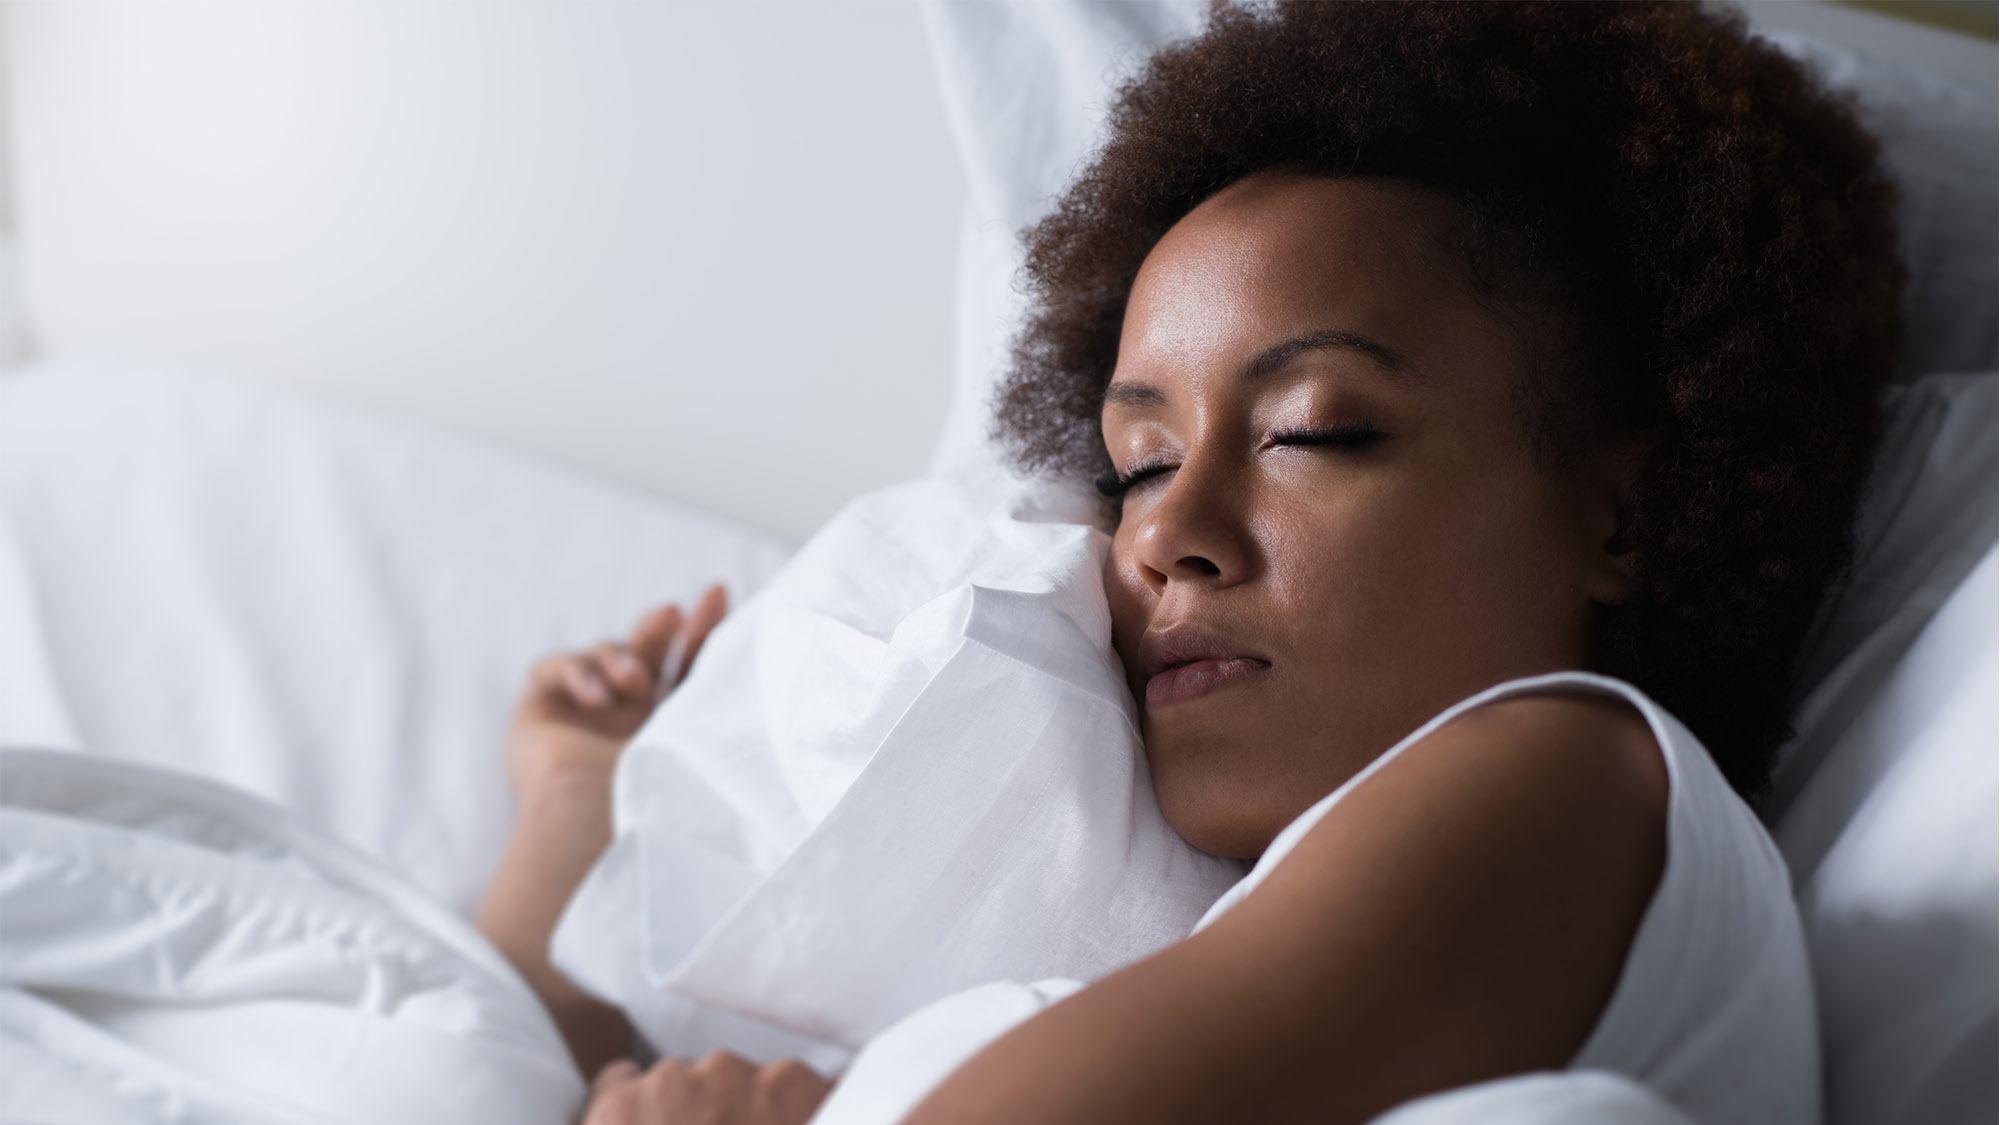 A Good Night's Sleep, What Does It Mean? - Firstbeat